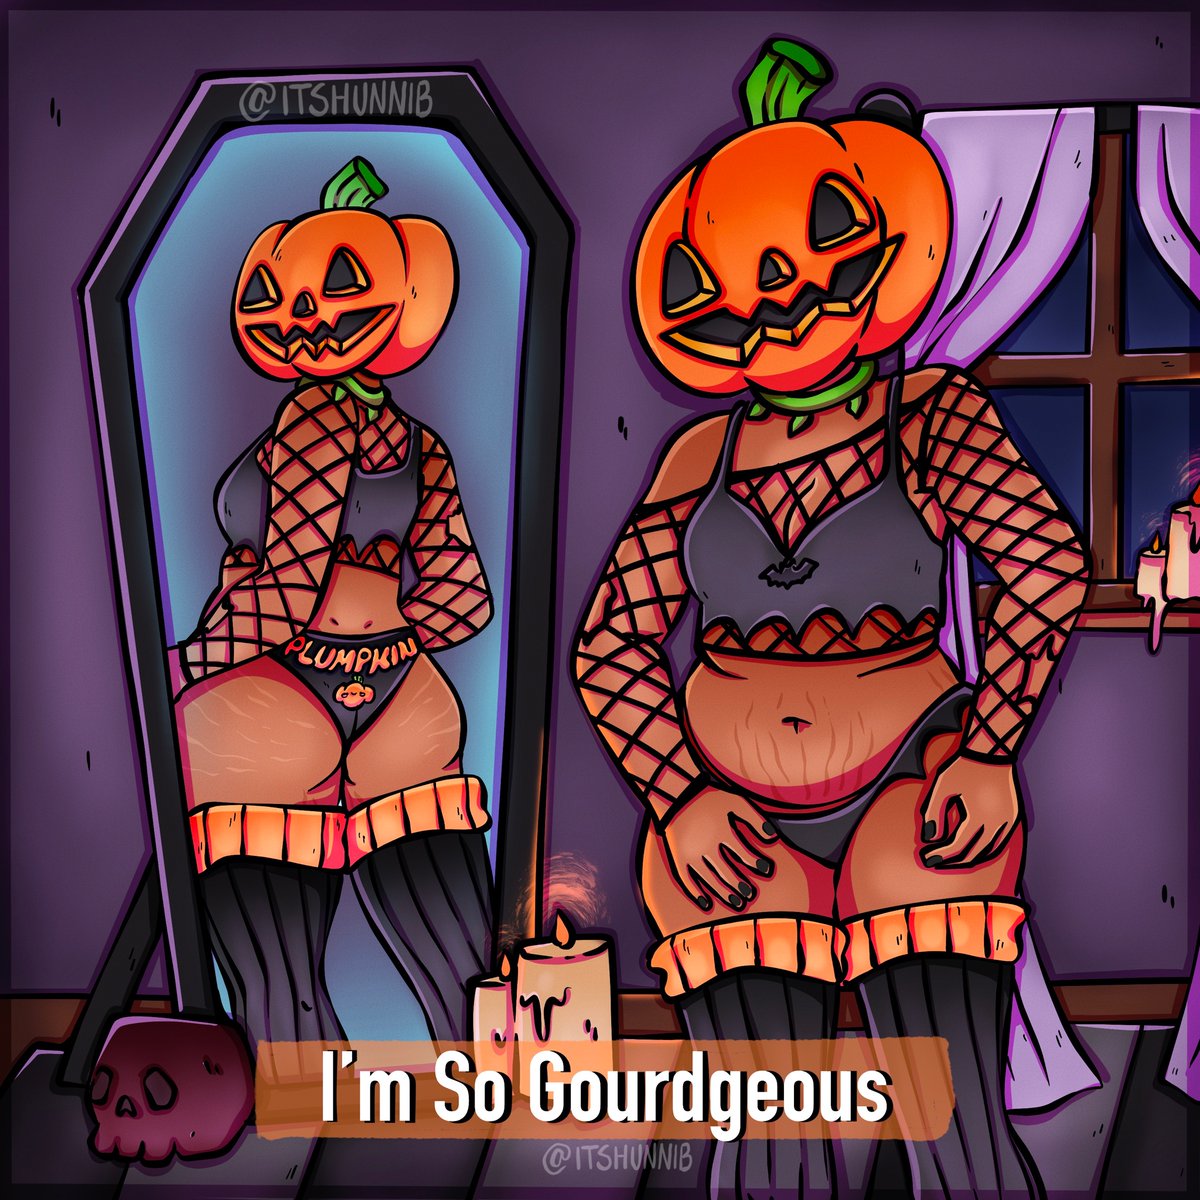 This the pumpkin spice y'all been waiting for?🎃🍂

You're so gourdgeous✨

#affirmationoftheday 
#halloweenisalifestyle #bodypositive #spookyseason #bodypositiveart #halloweenart #bodyposi #stretchmarksarebeautiful